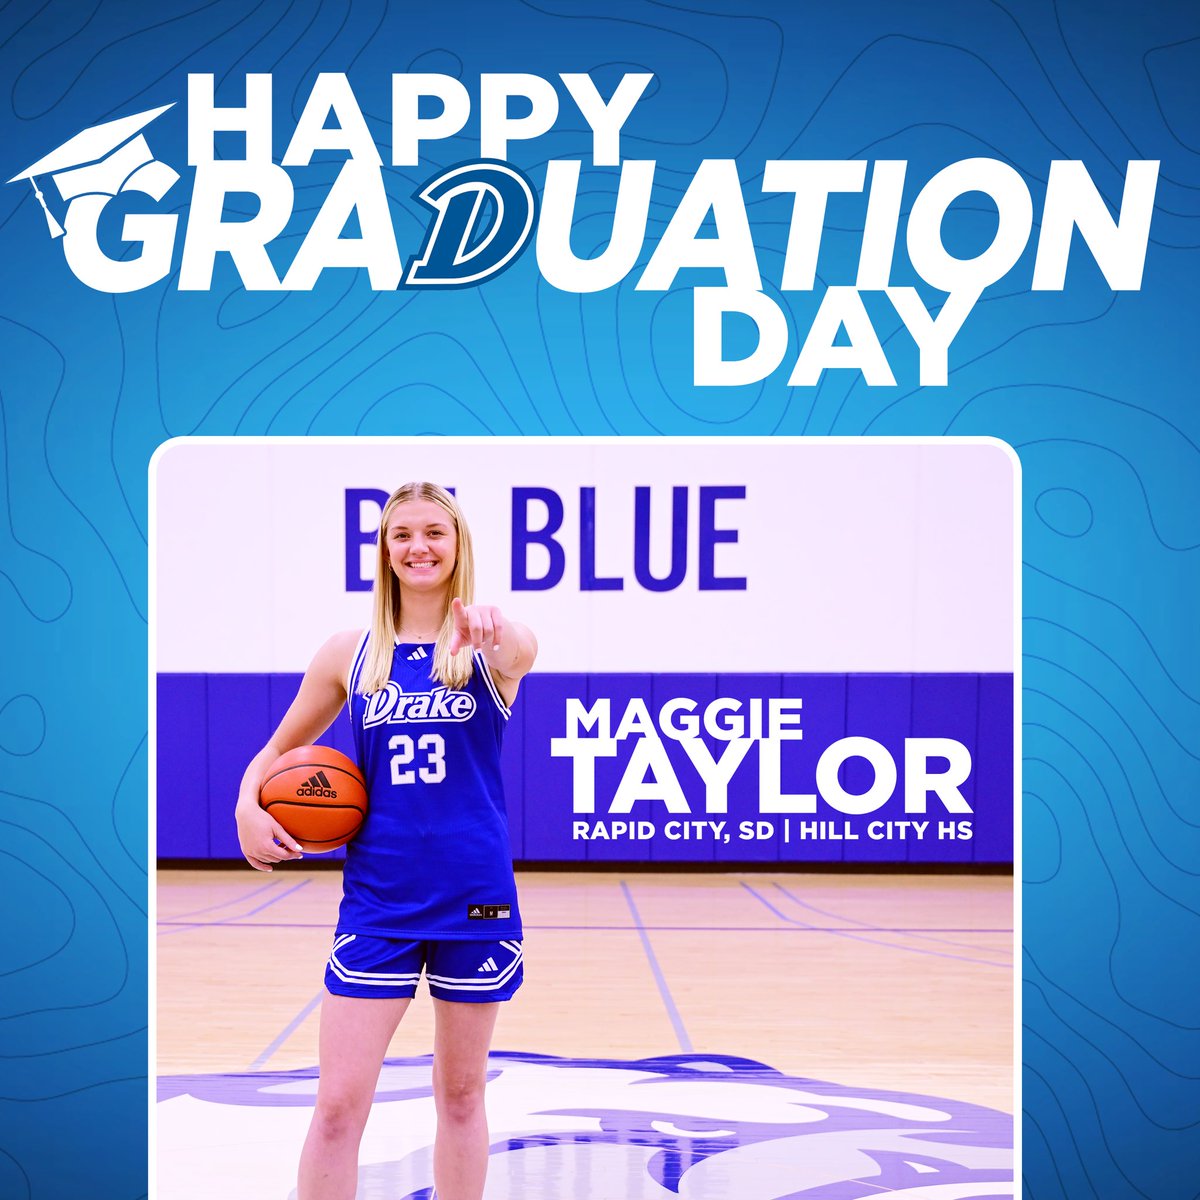 Next Stop: 📍Des Moines 𝓒𝓸𝓷𝓰𝓻𝓪𝓽𝓼 to Maggie Taylor on her graduation from Hill City High School today! #BeBlue